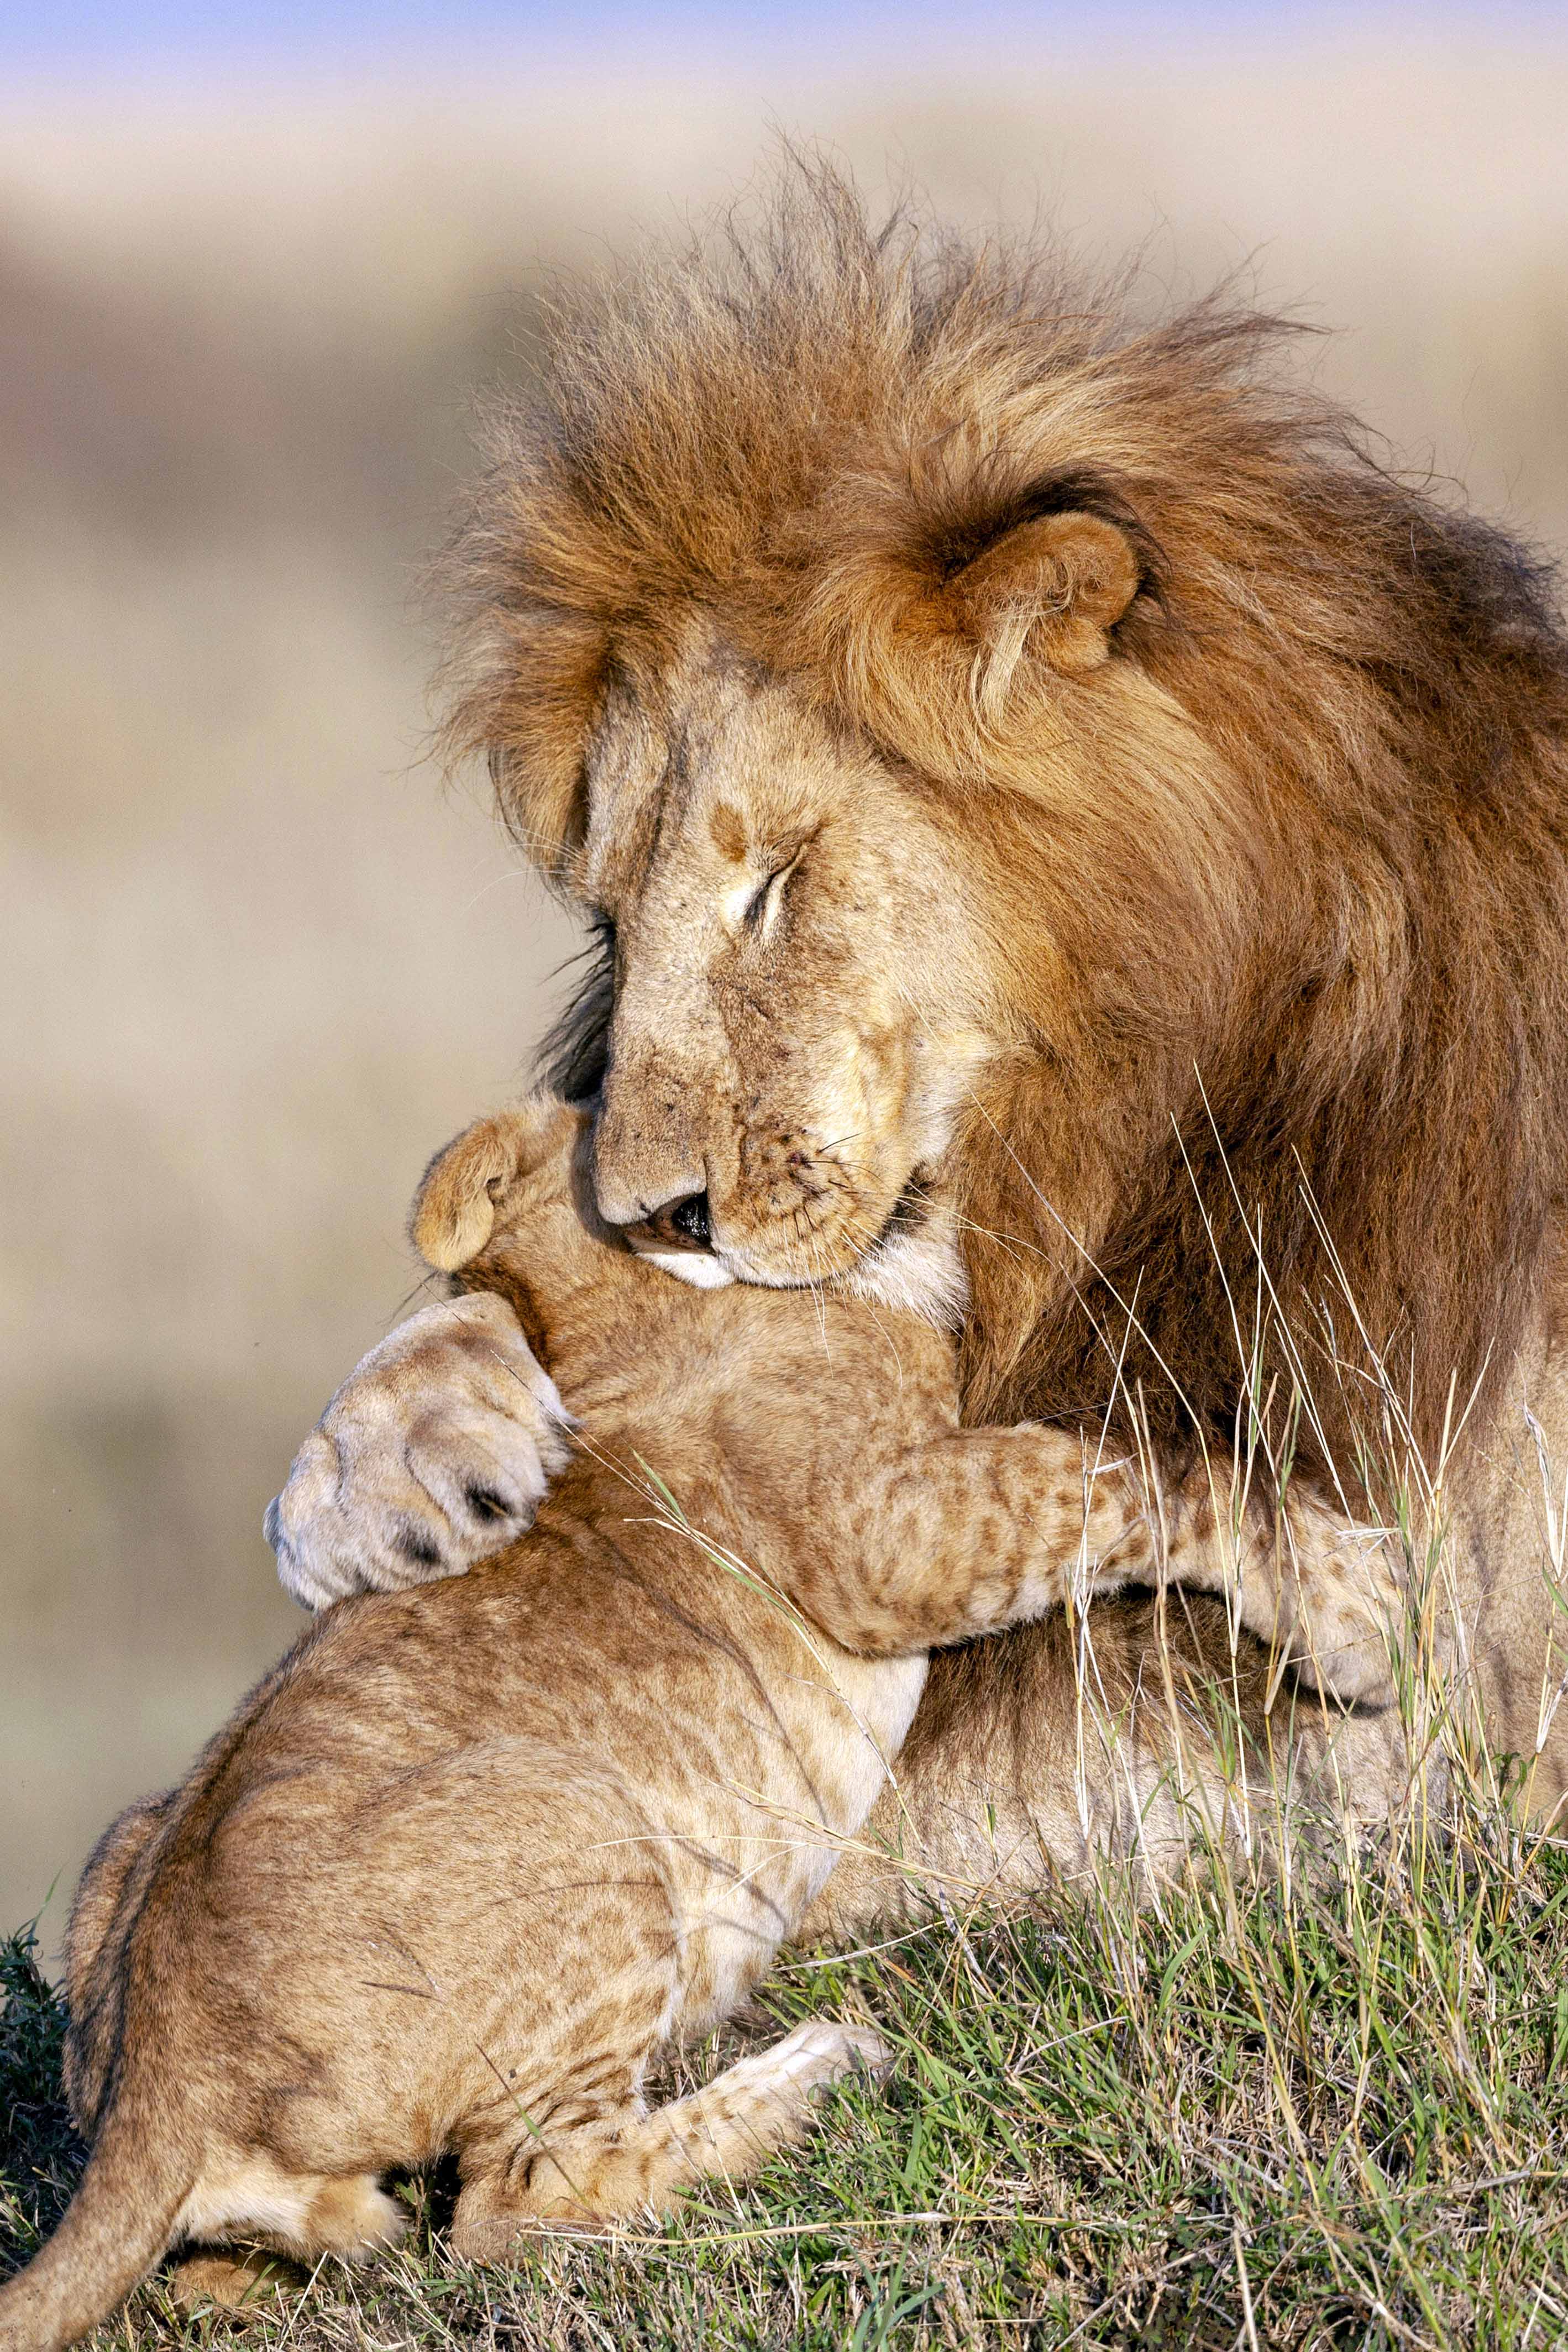 Heartwarming Photos Of Lion Dad And Cub Embracing Reveal Gentle Side Of King Of The Savanna